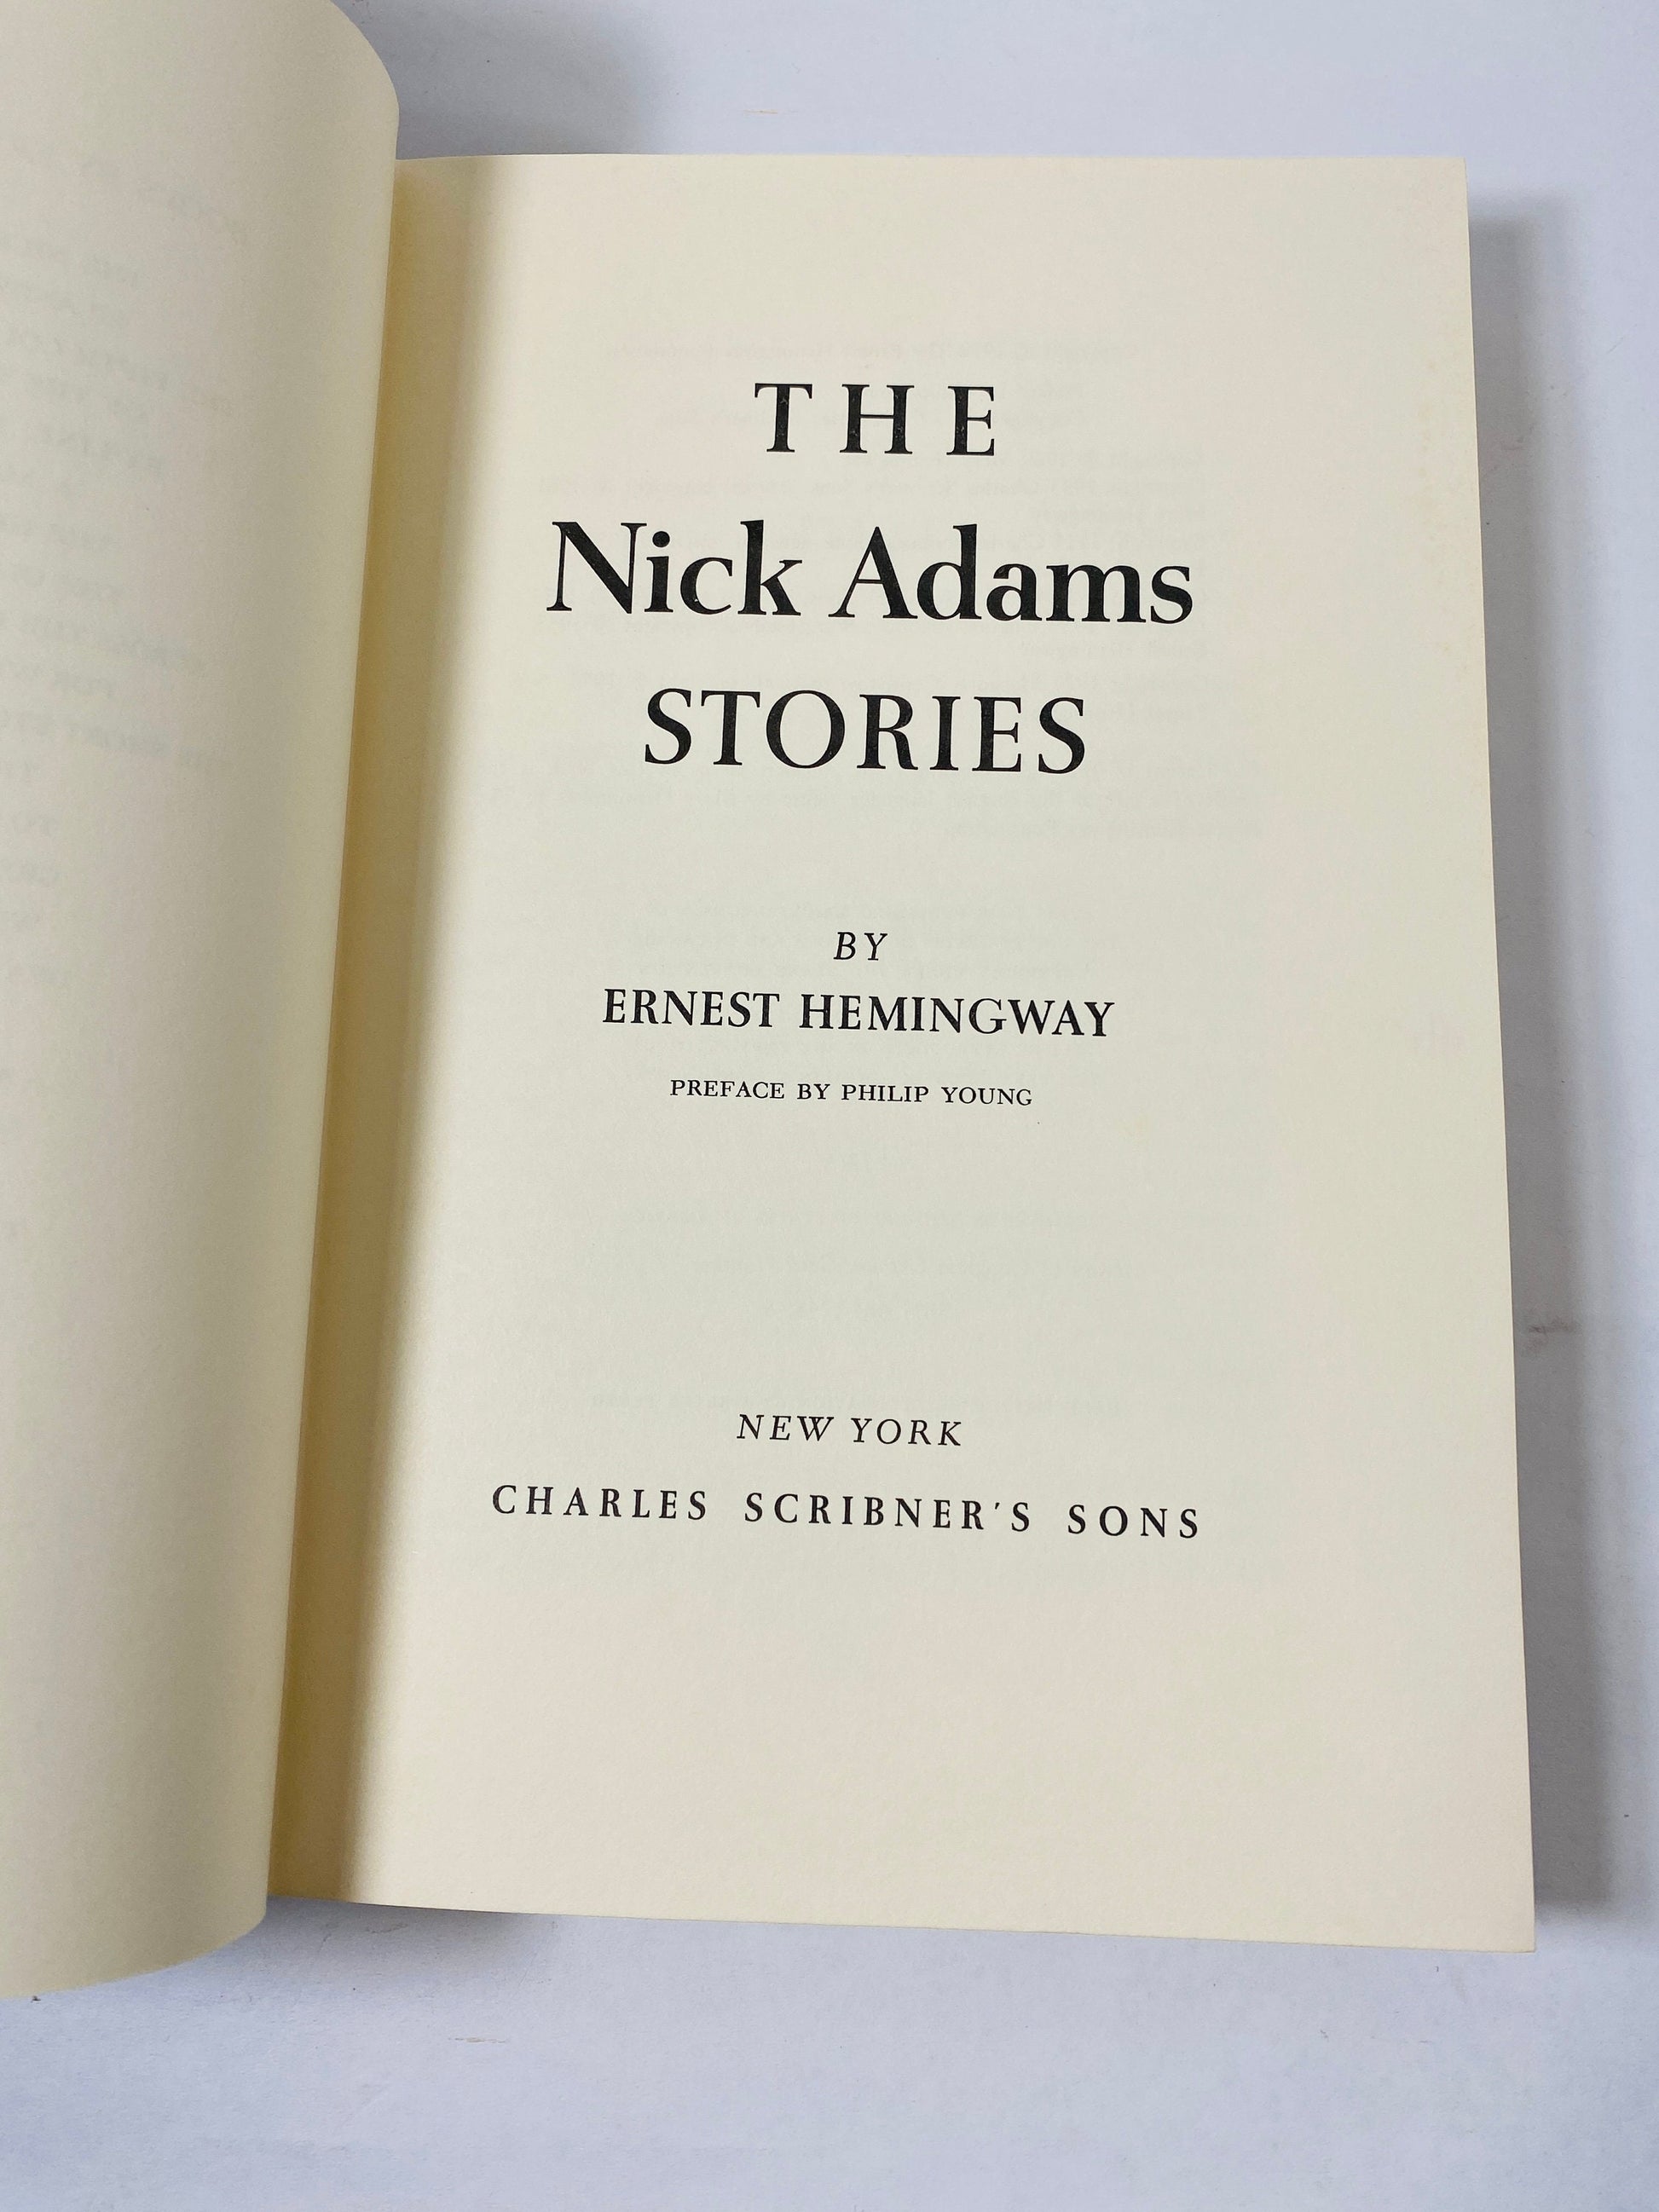 1972 Nick Adams Stories by Ernest Hemingway Vintage book EARLY PRINTING of unpublished view of of Nick's life and development as a writer